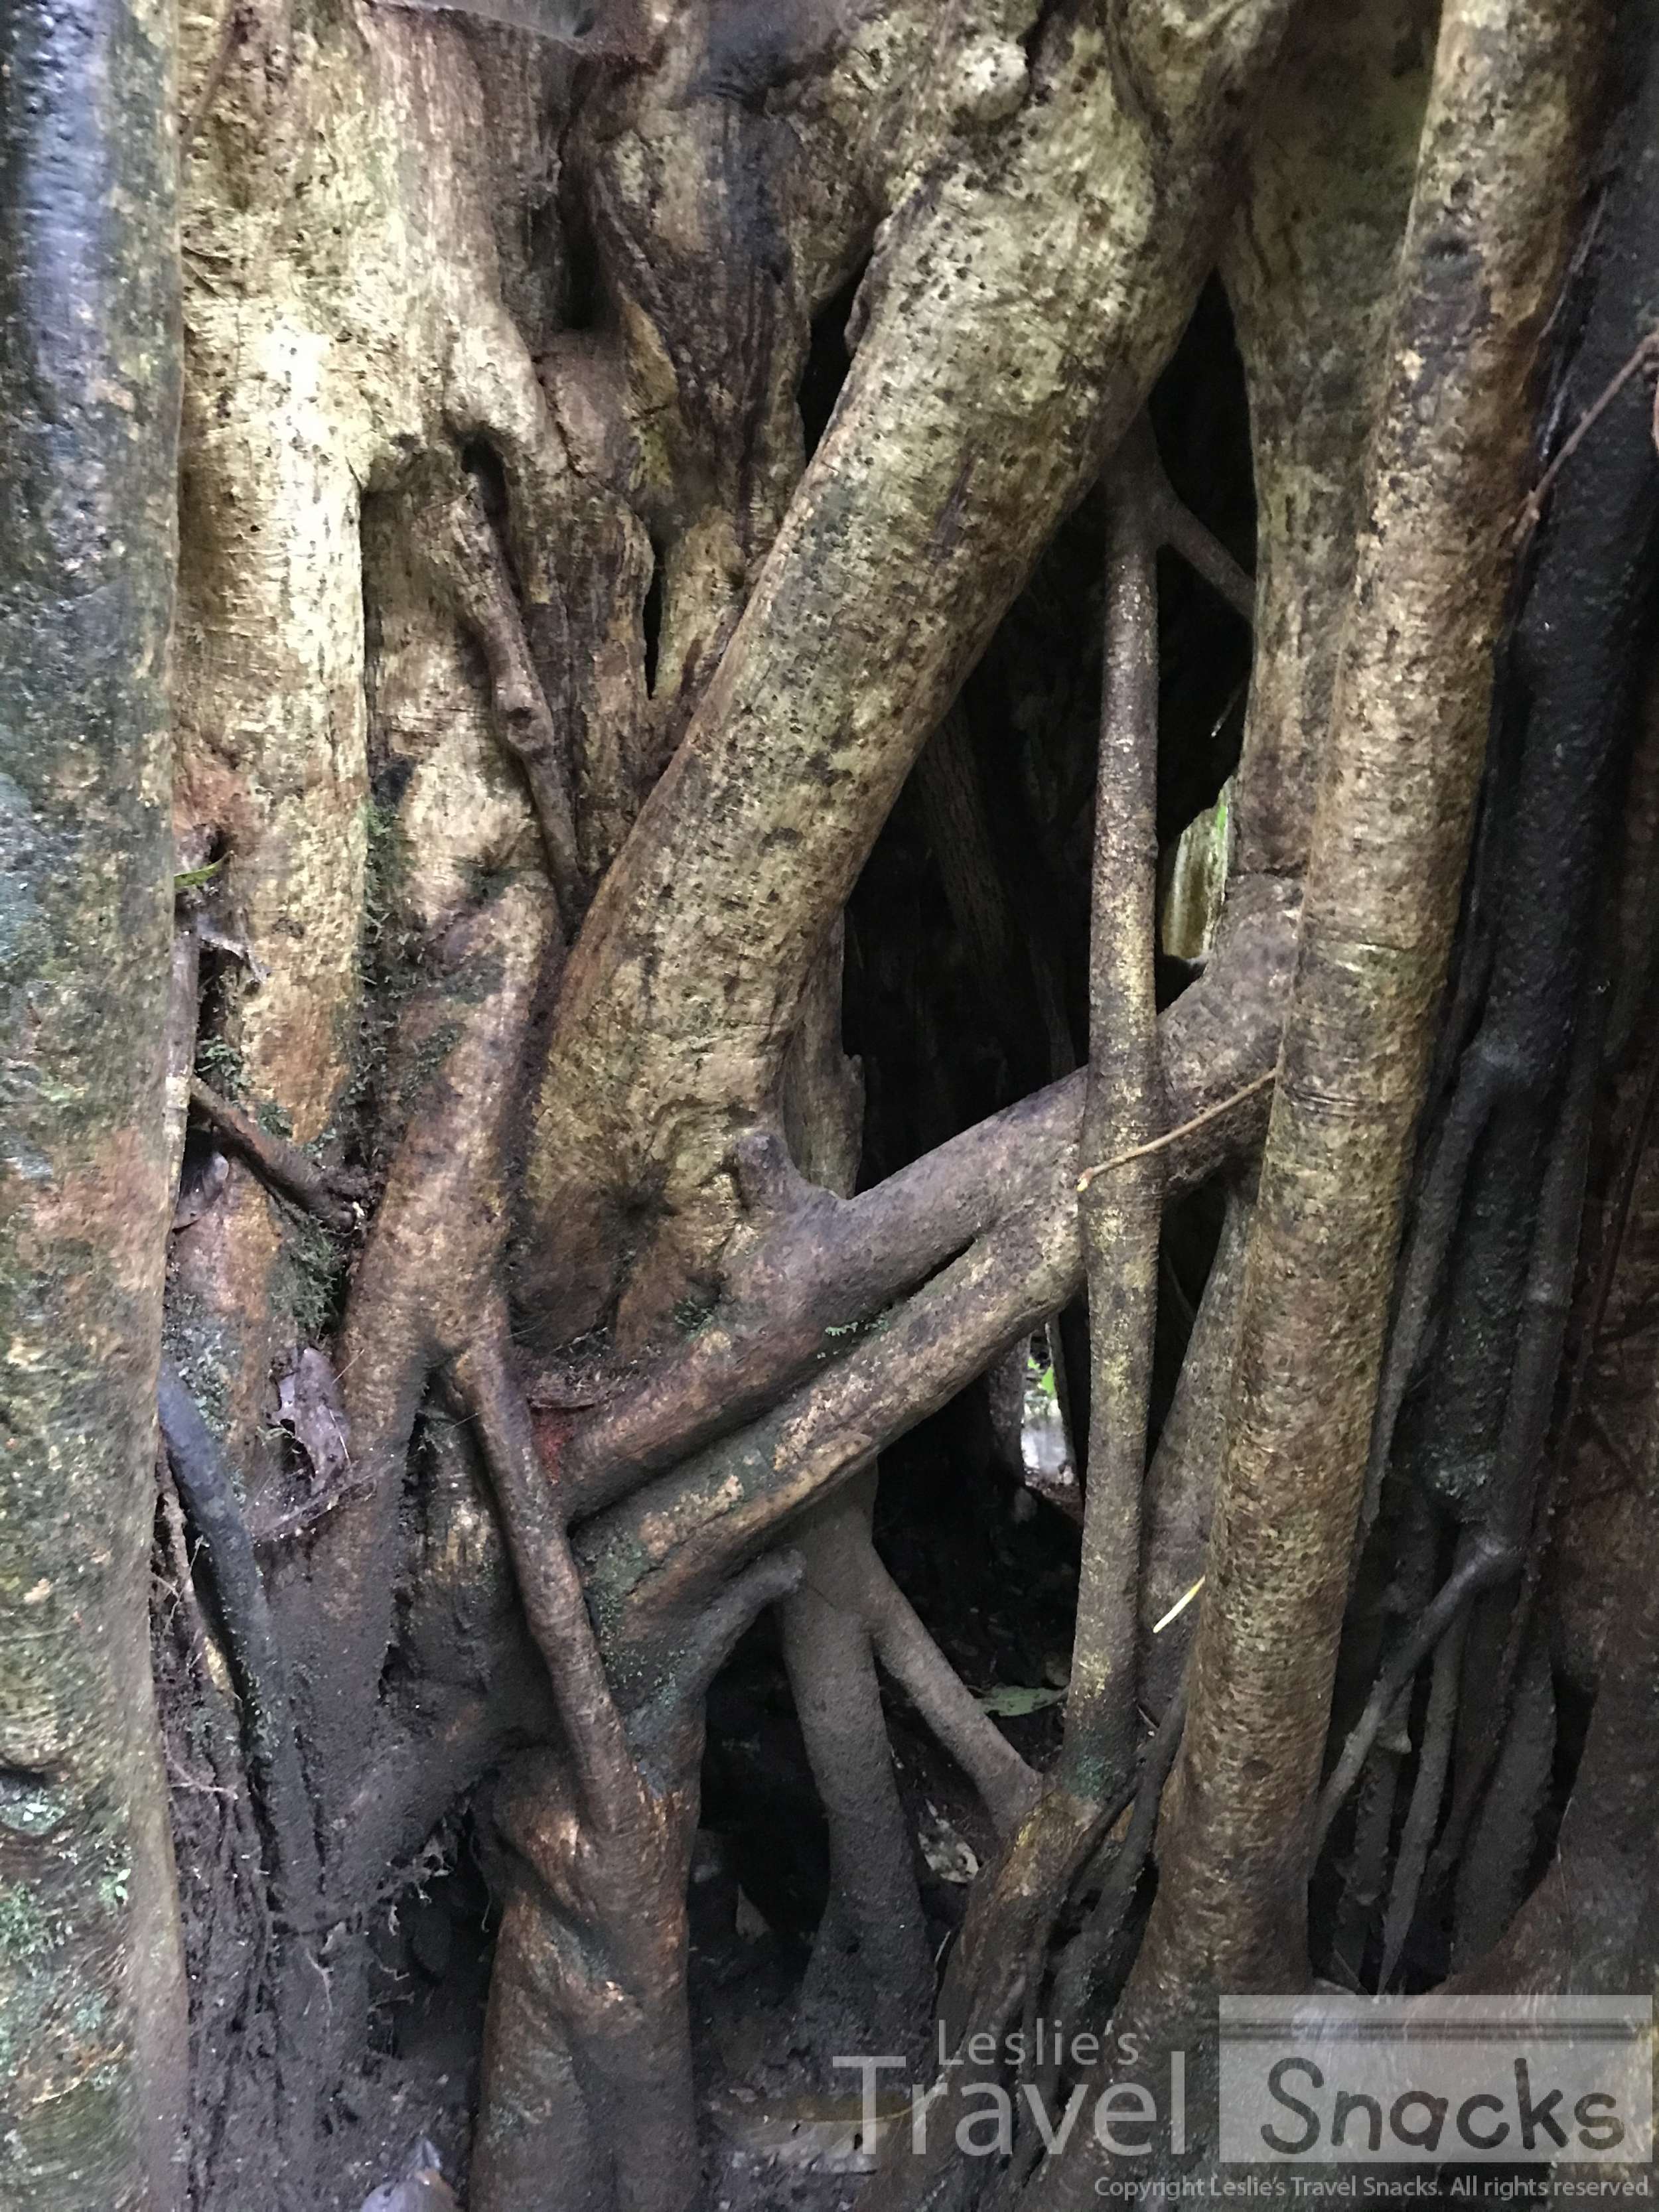 Strangler Fig tree - hollow inside - you can climb up it.